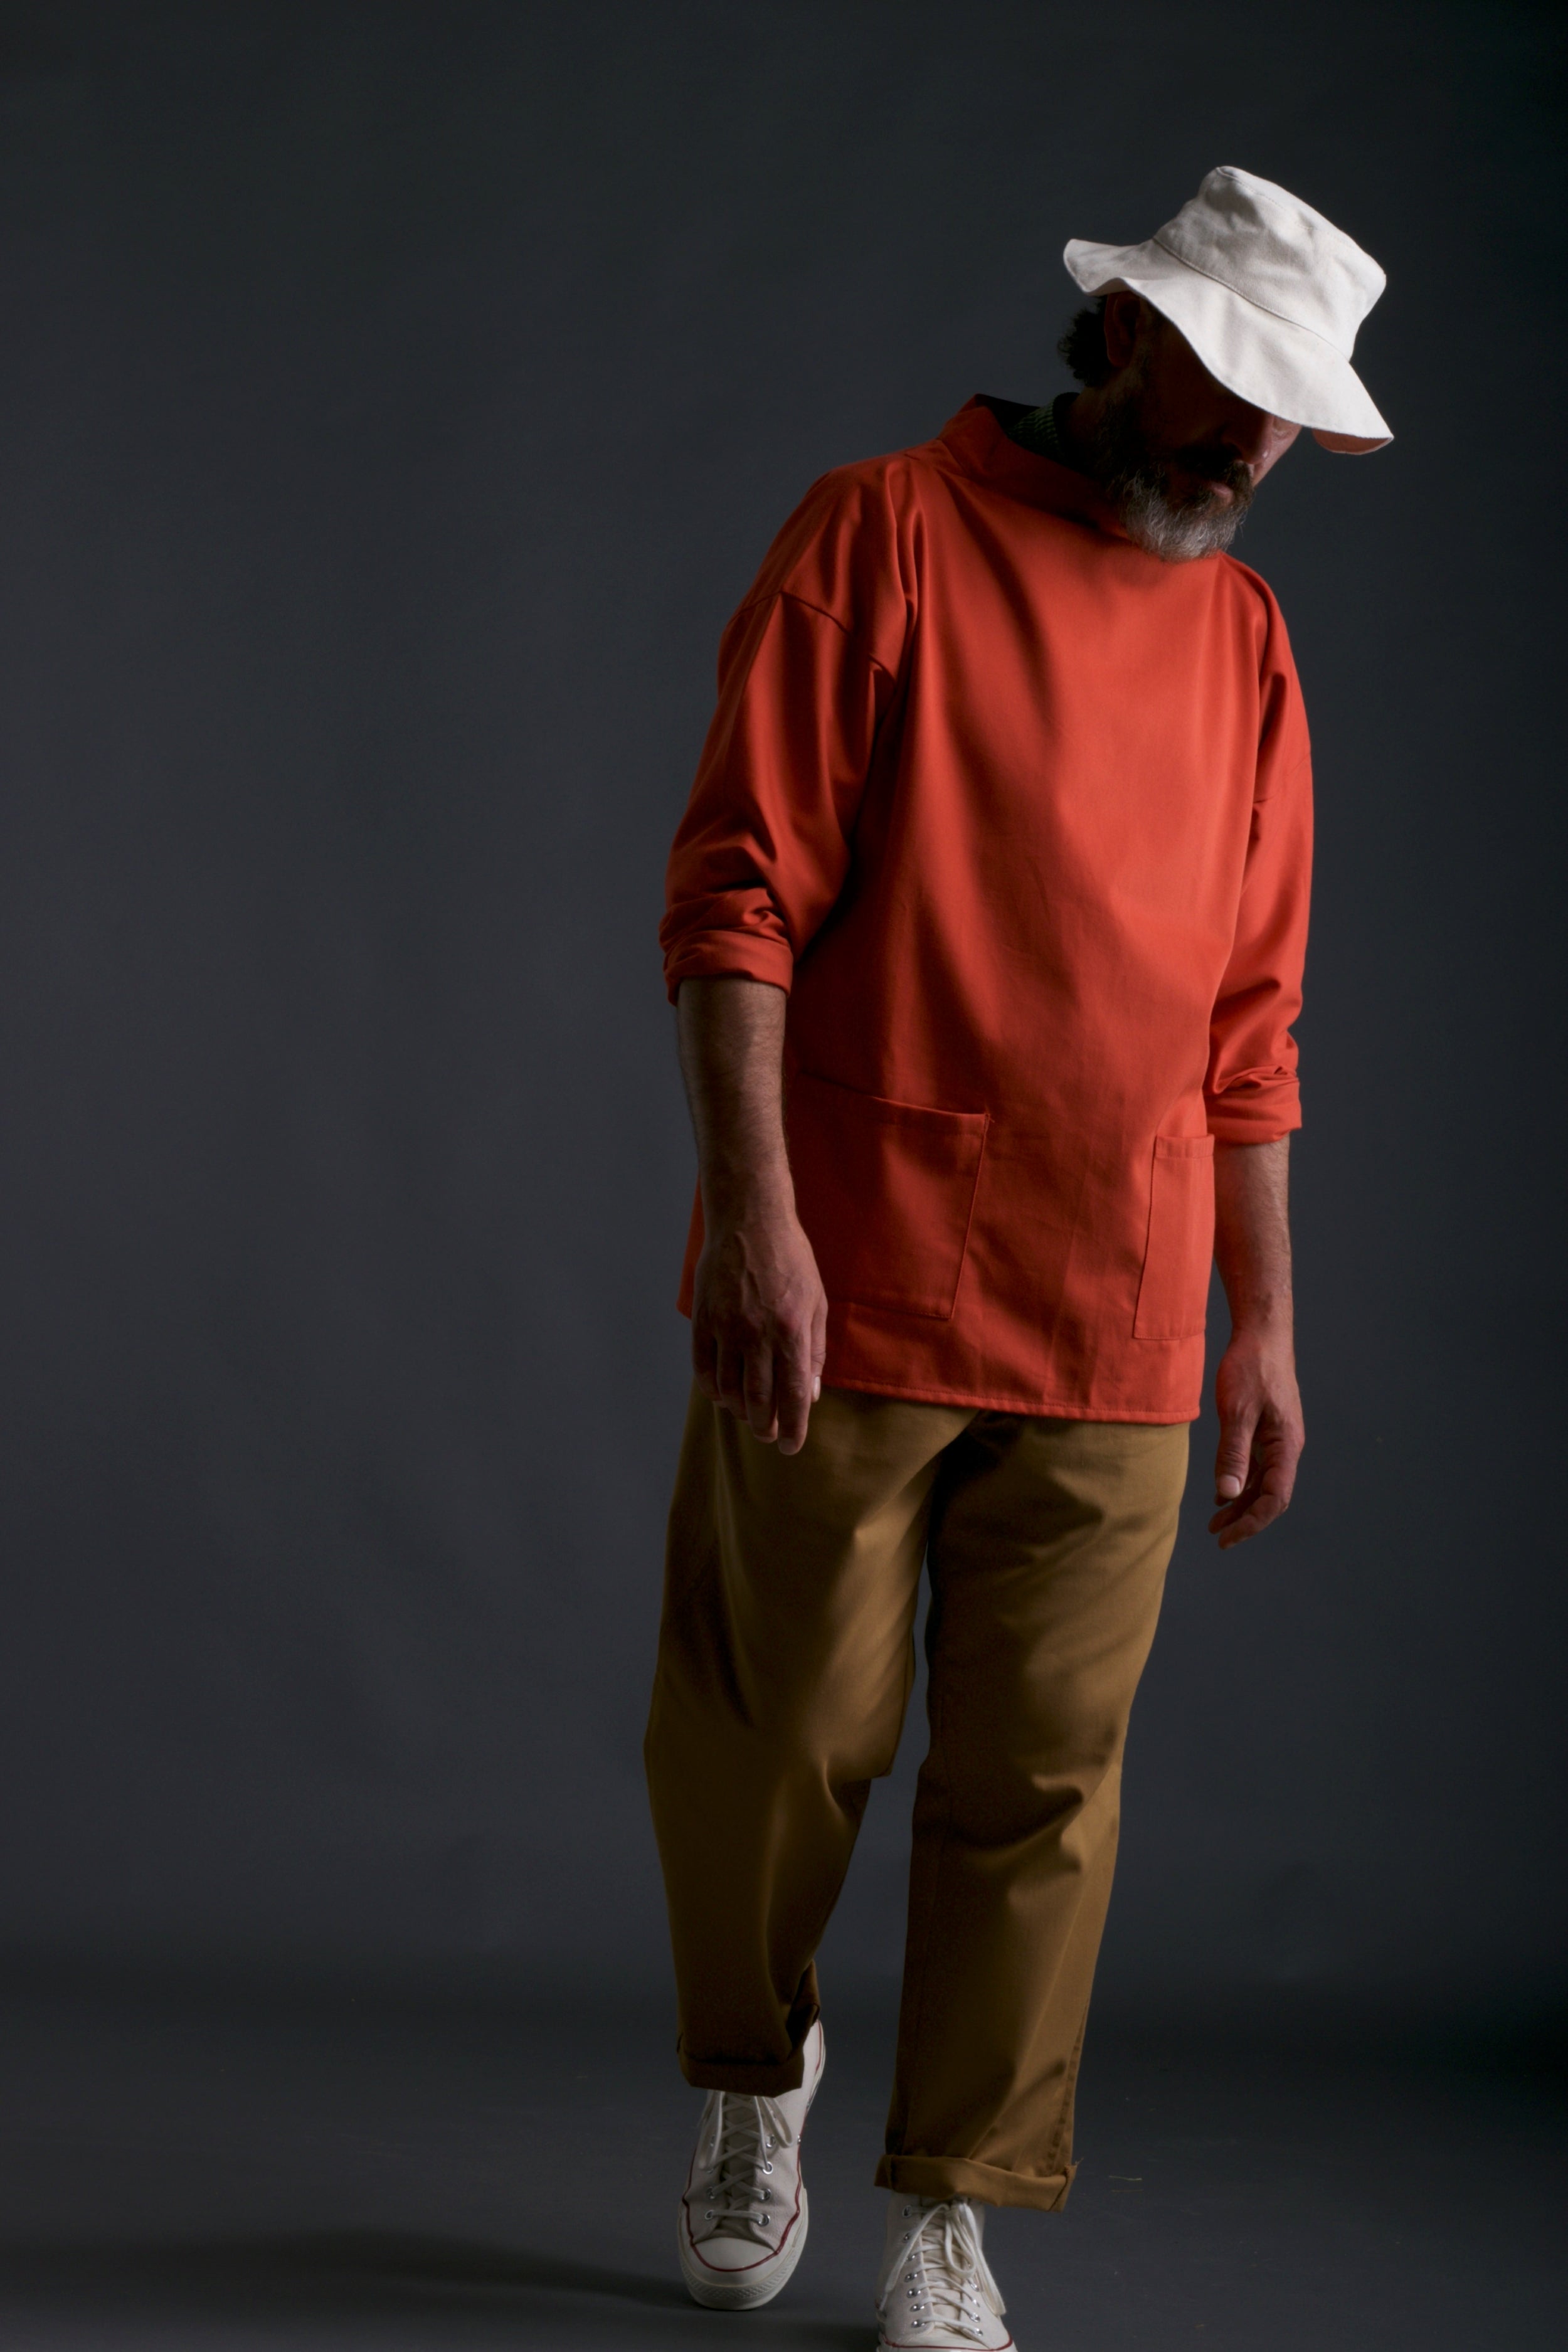 Man wears Carrier Company Classic Trouser in Tan, Traditional Norfolk Slop in Orange and Sand Cotton Sunhat